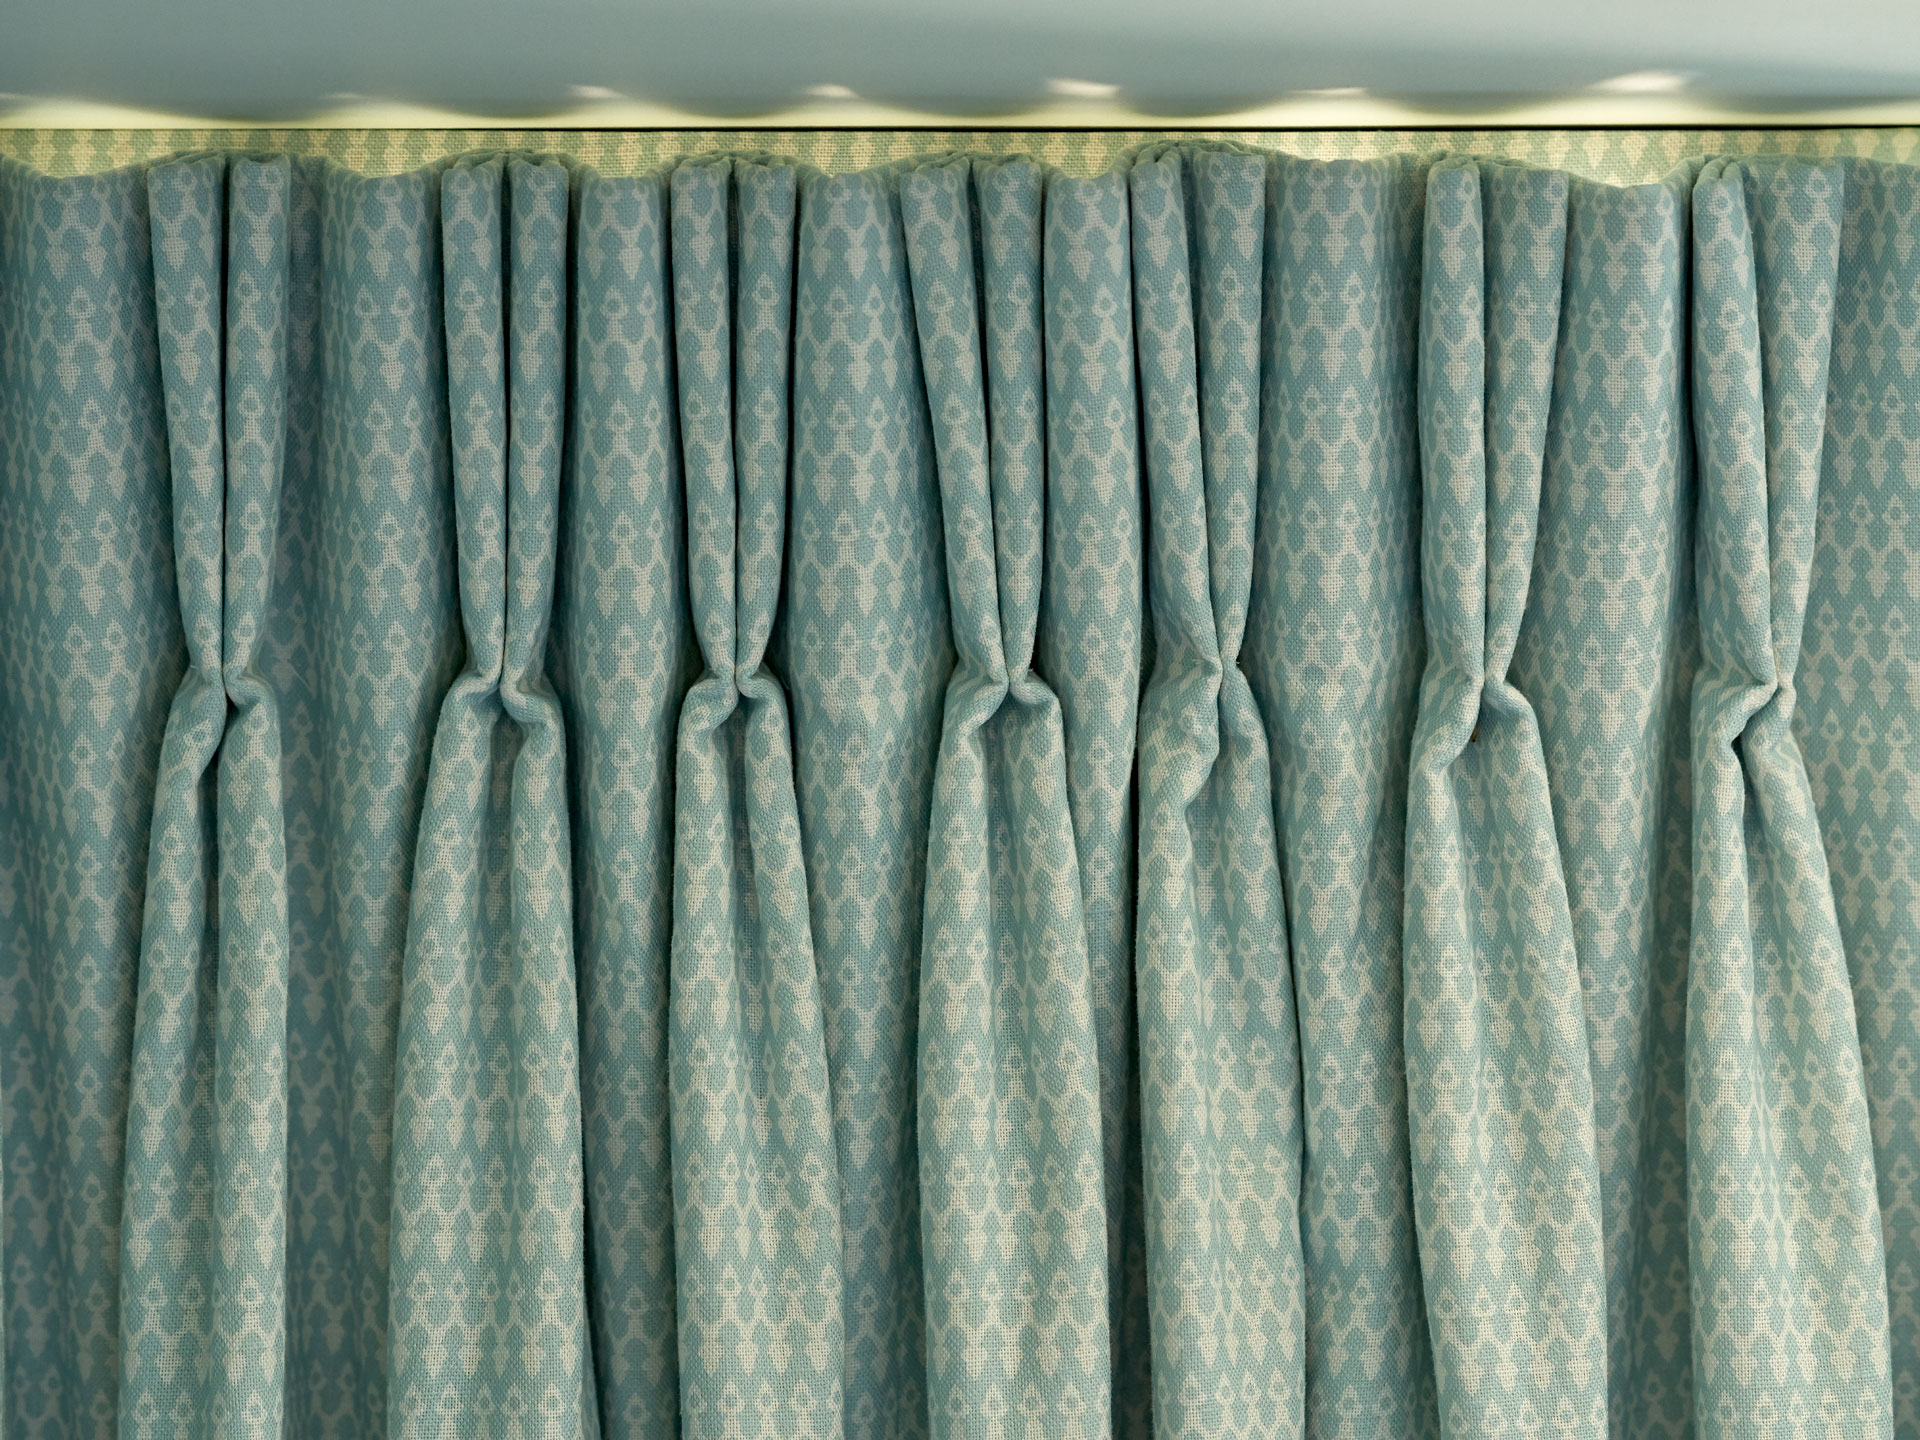 Double Pinch Pleat Curtains